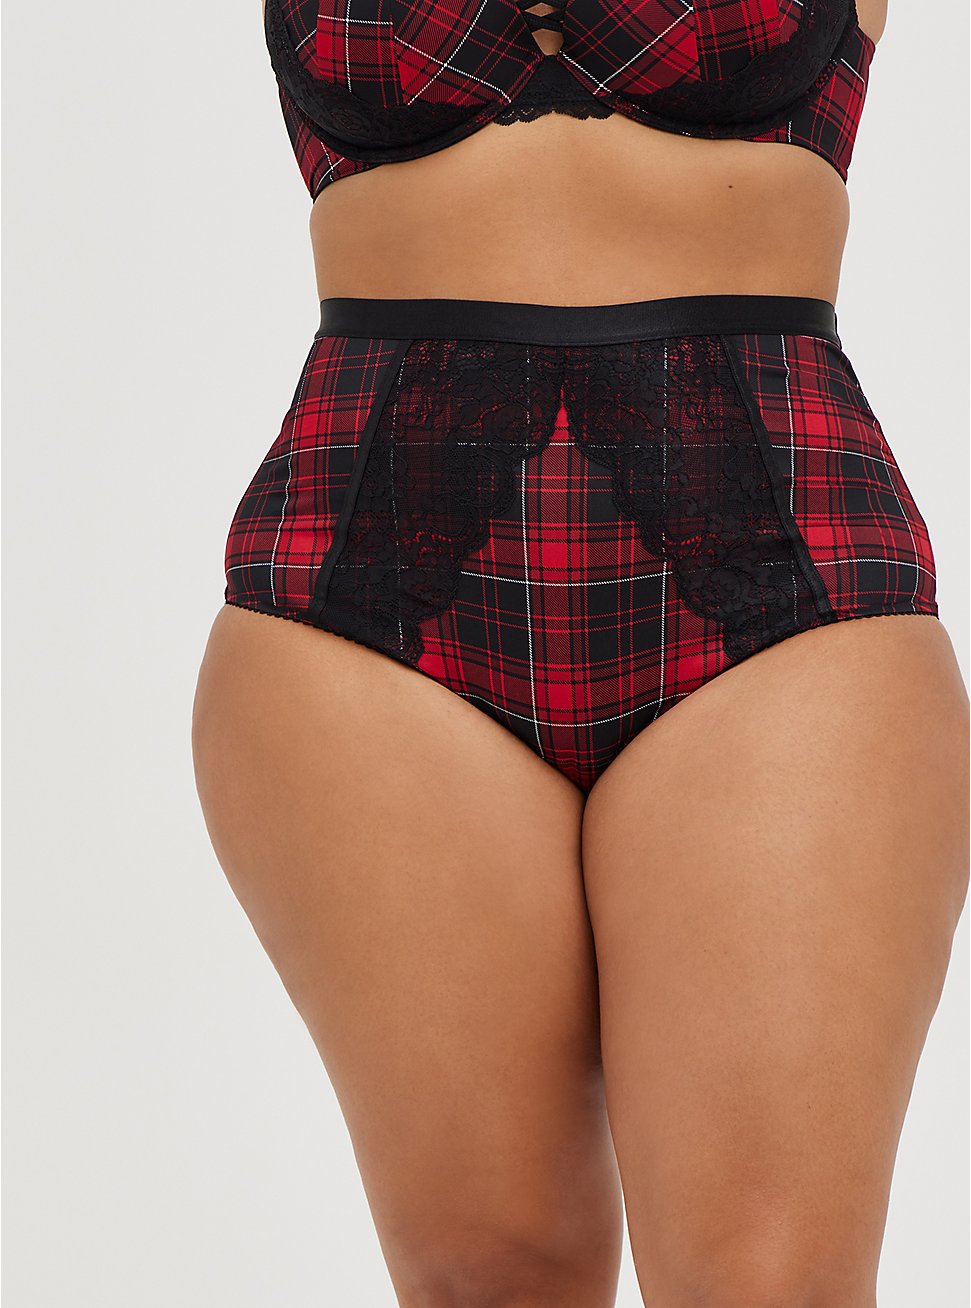 Cut-Out High Waist Panty - Lace Plaid Red, NY PLAID, hi-res